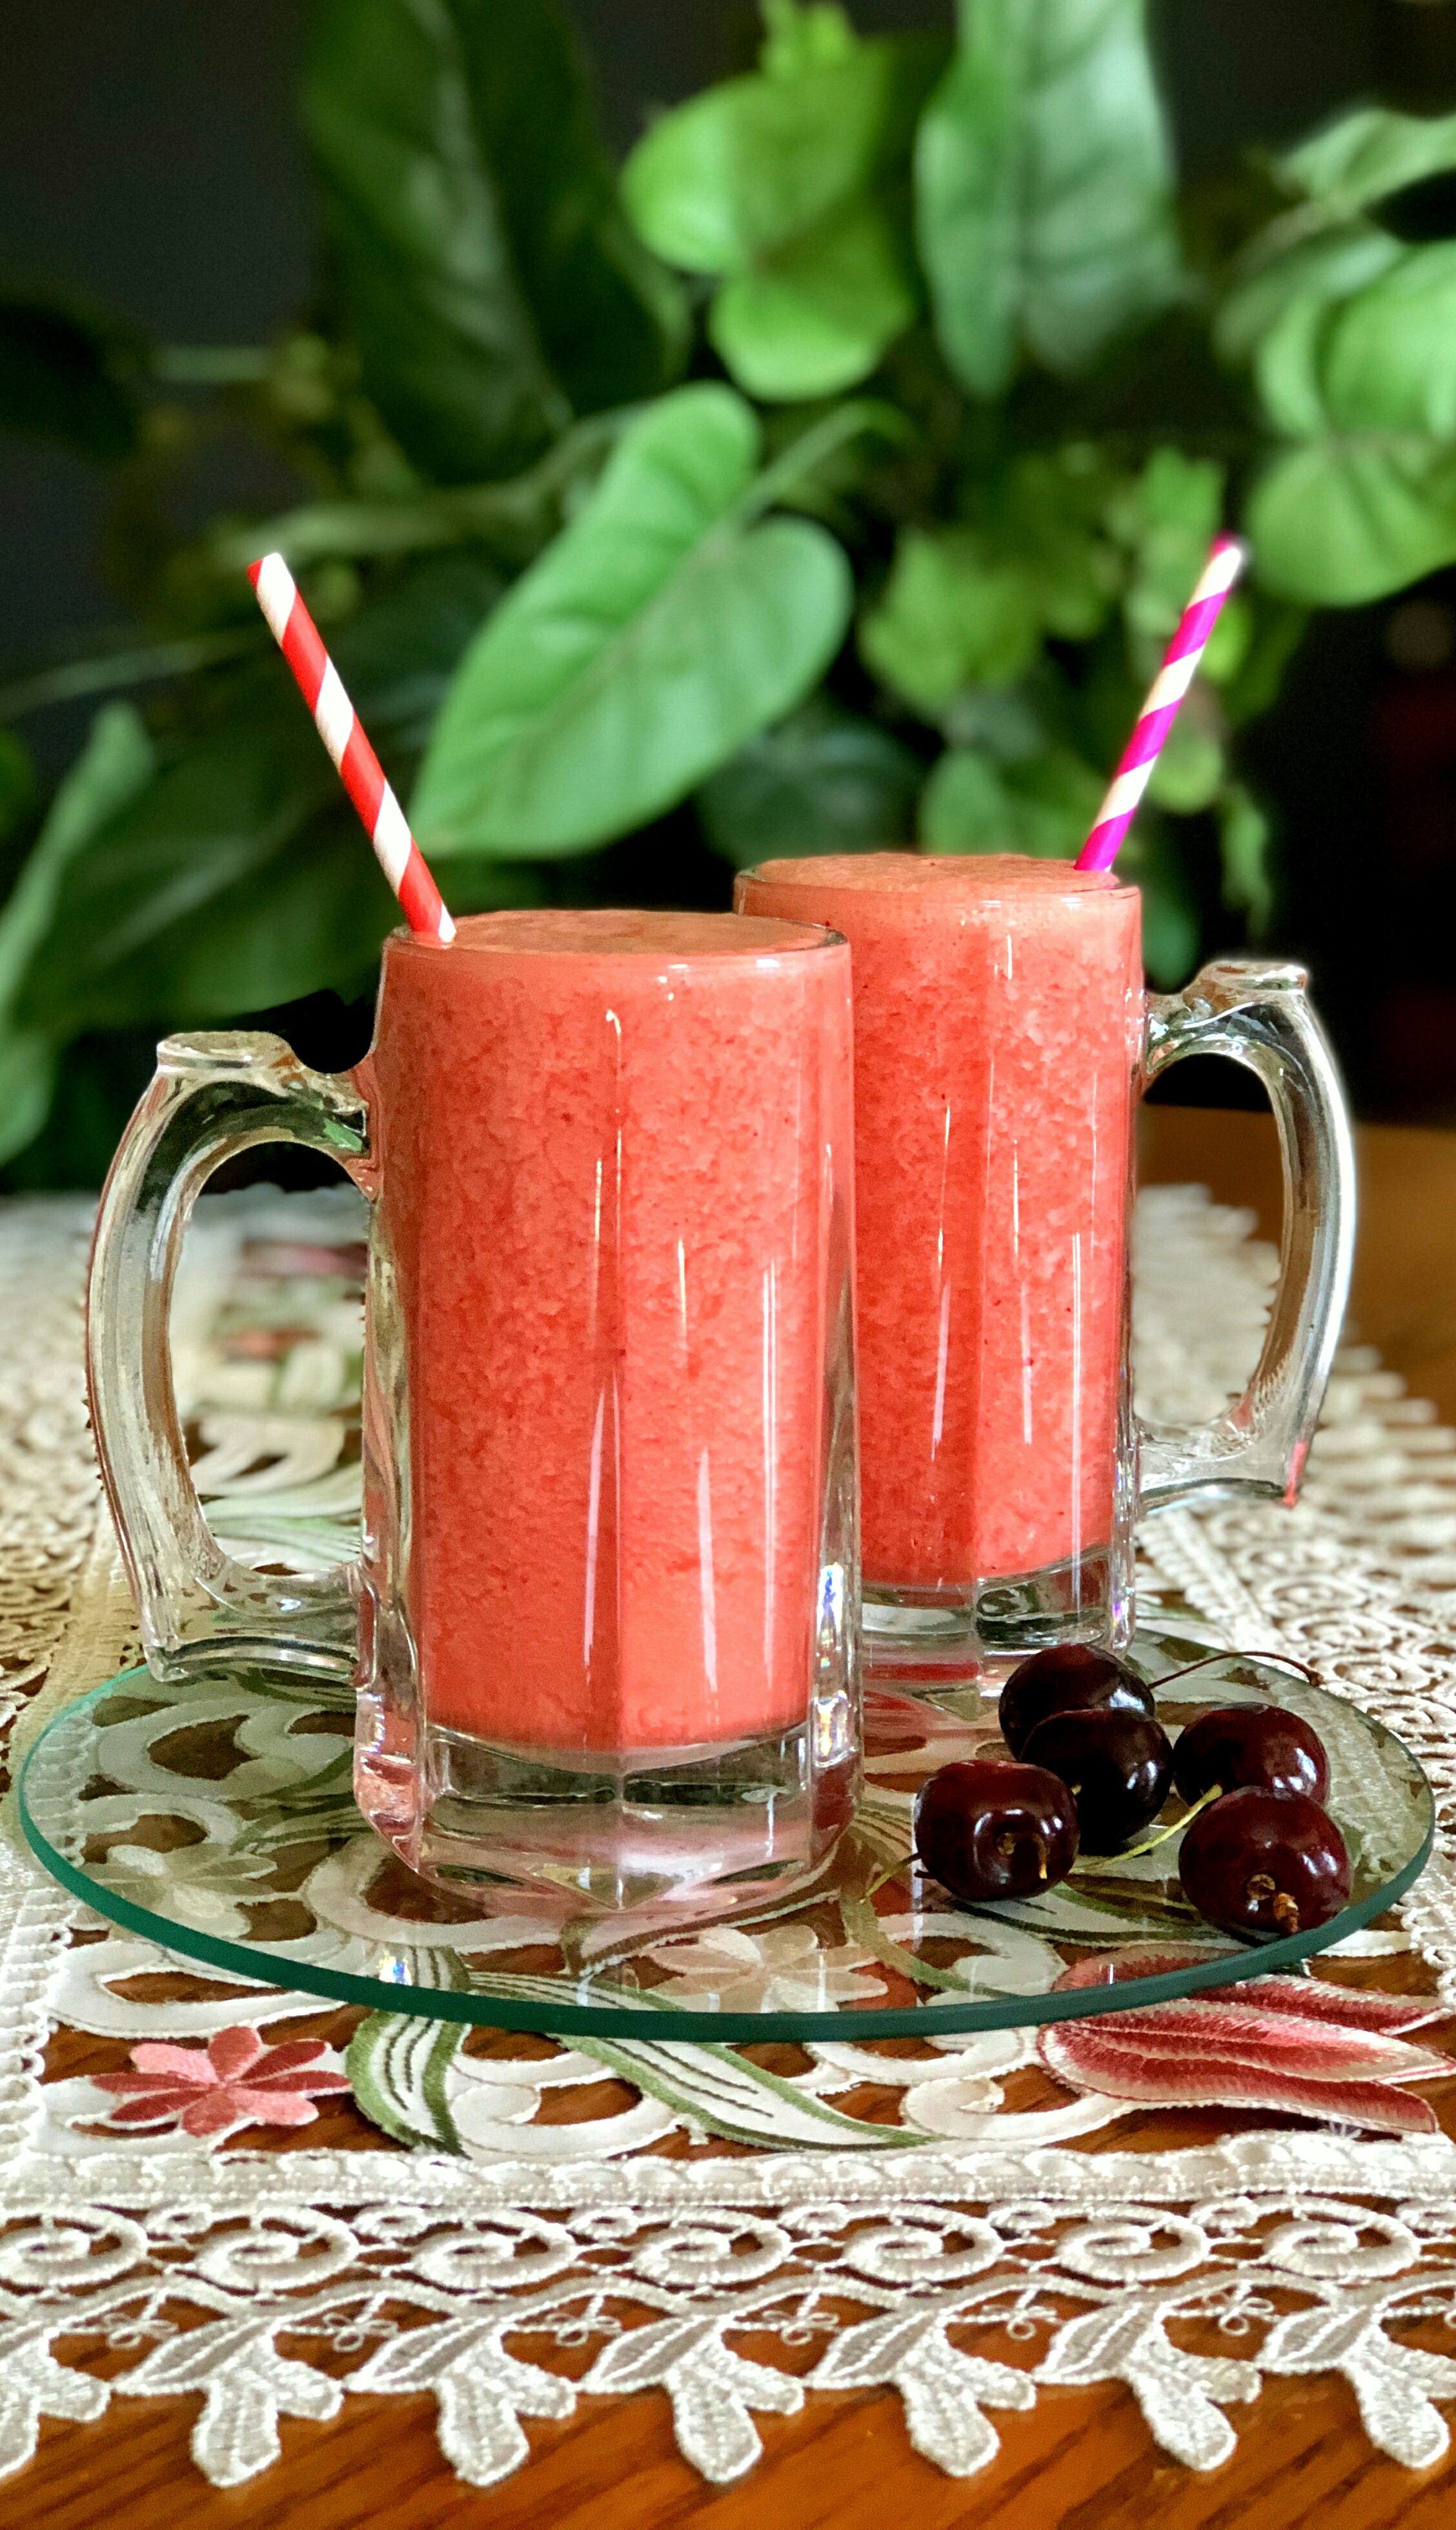 Cool-Down Grapefruit Smoothie Yoly